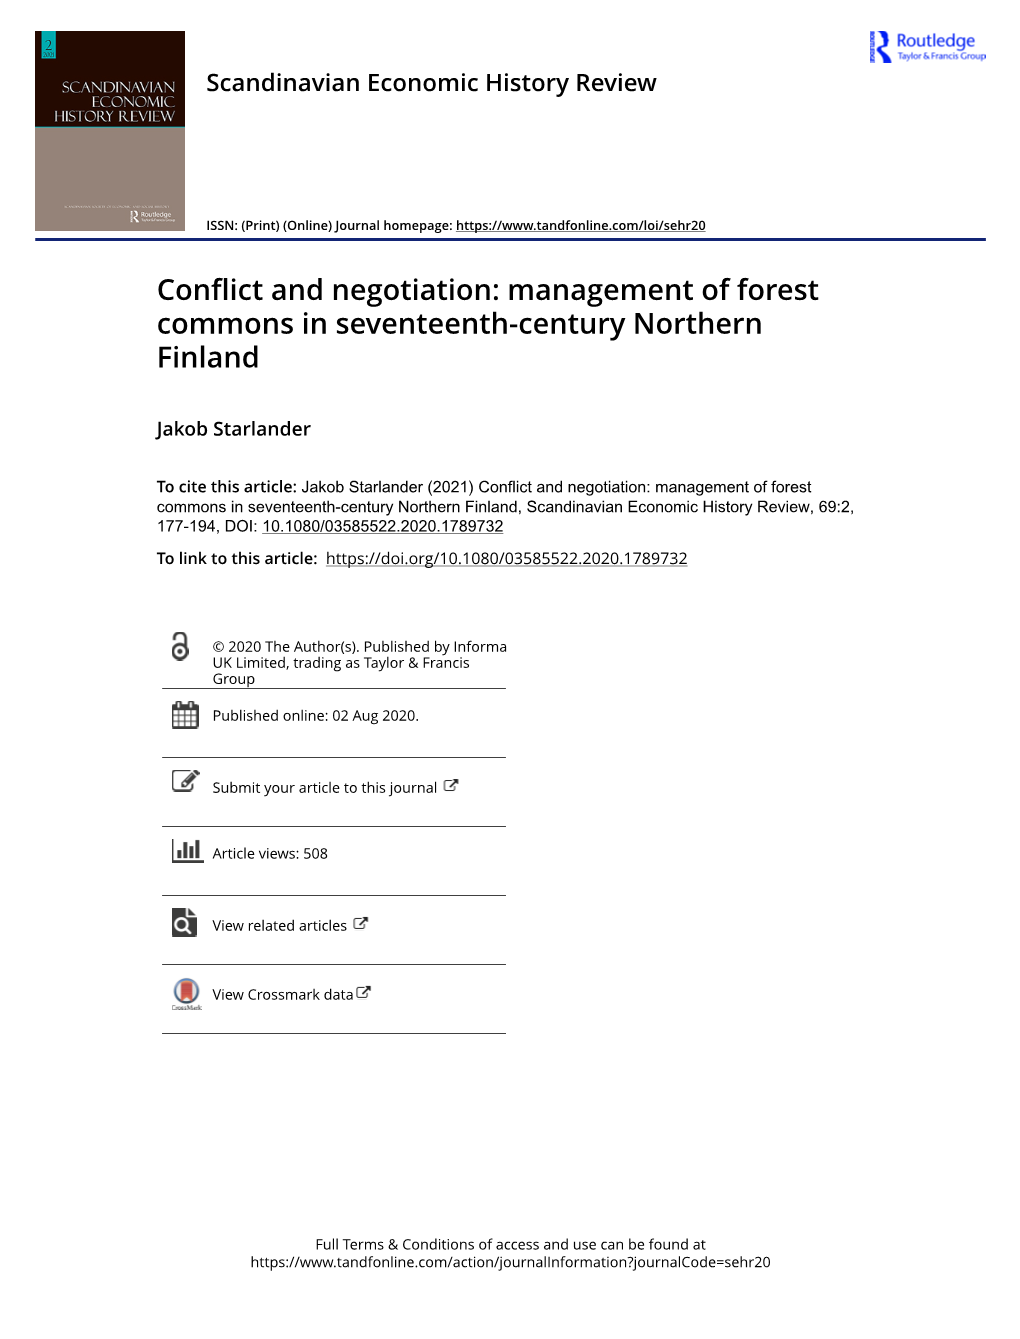 Management of Forest Commons in Seventeenth-Century Northern Finland